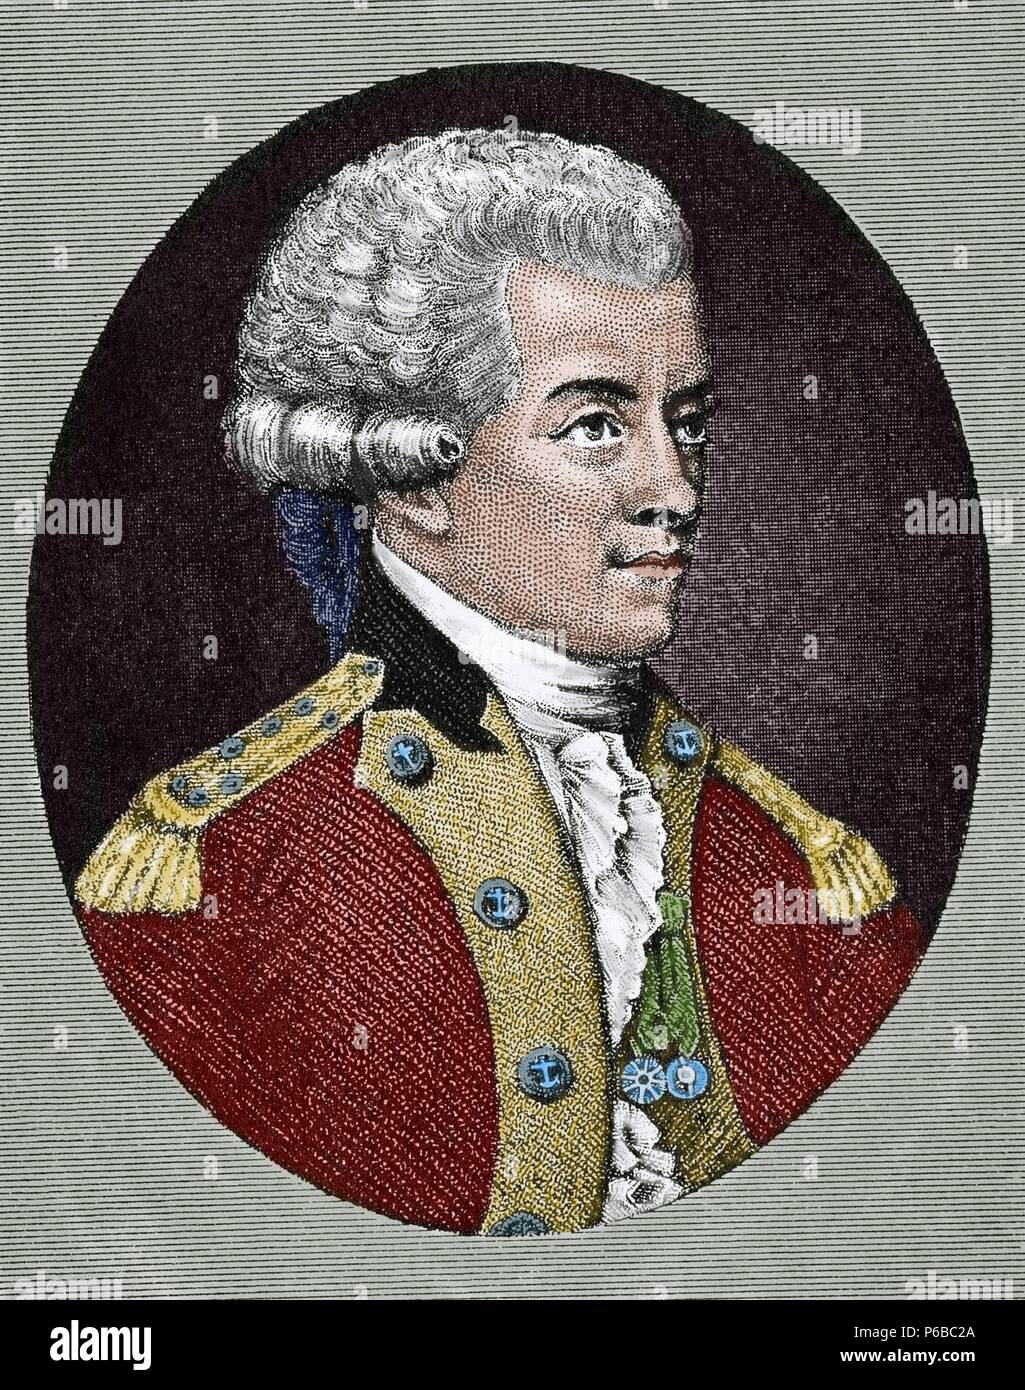 John Paul Jones (1747-1792). Scottish sailor and the United States's first well-known naval fighter in the American Revolution. Engraving. Colored. Stock Photo